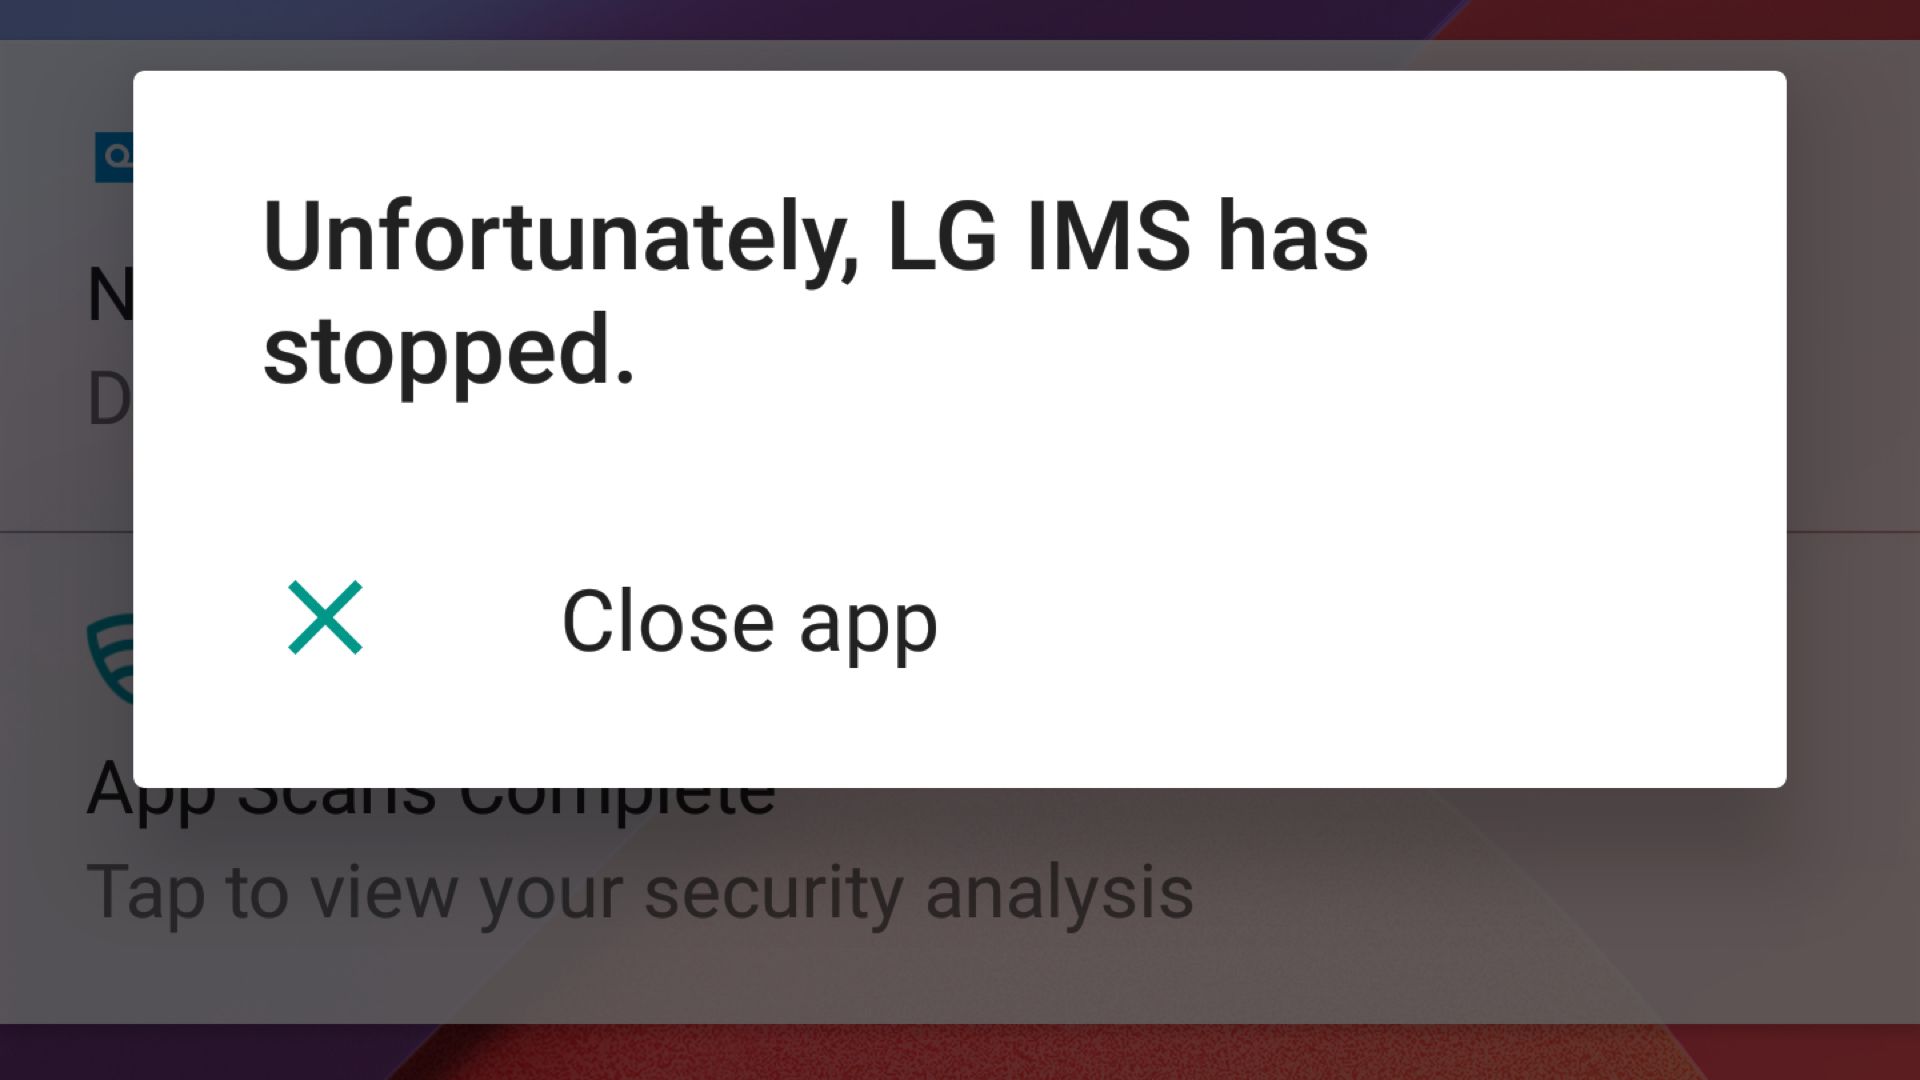 LG IMS has stopped error on T-Mobile fix